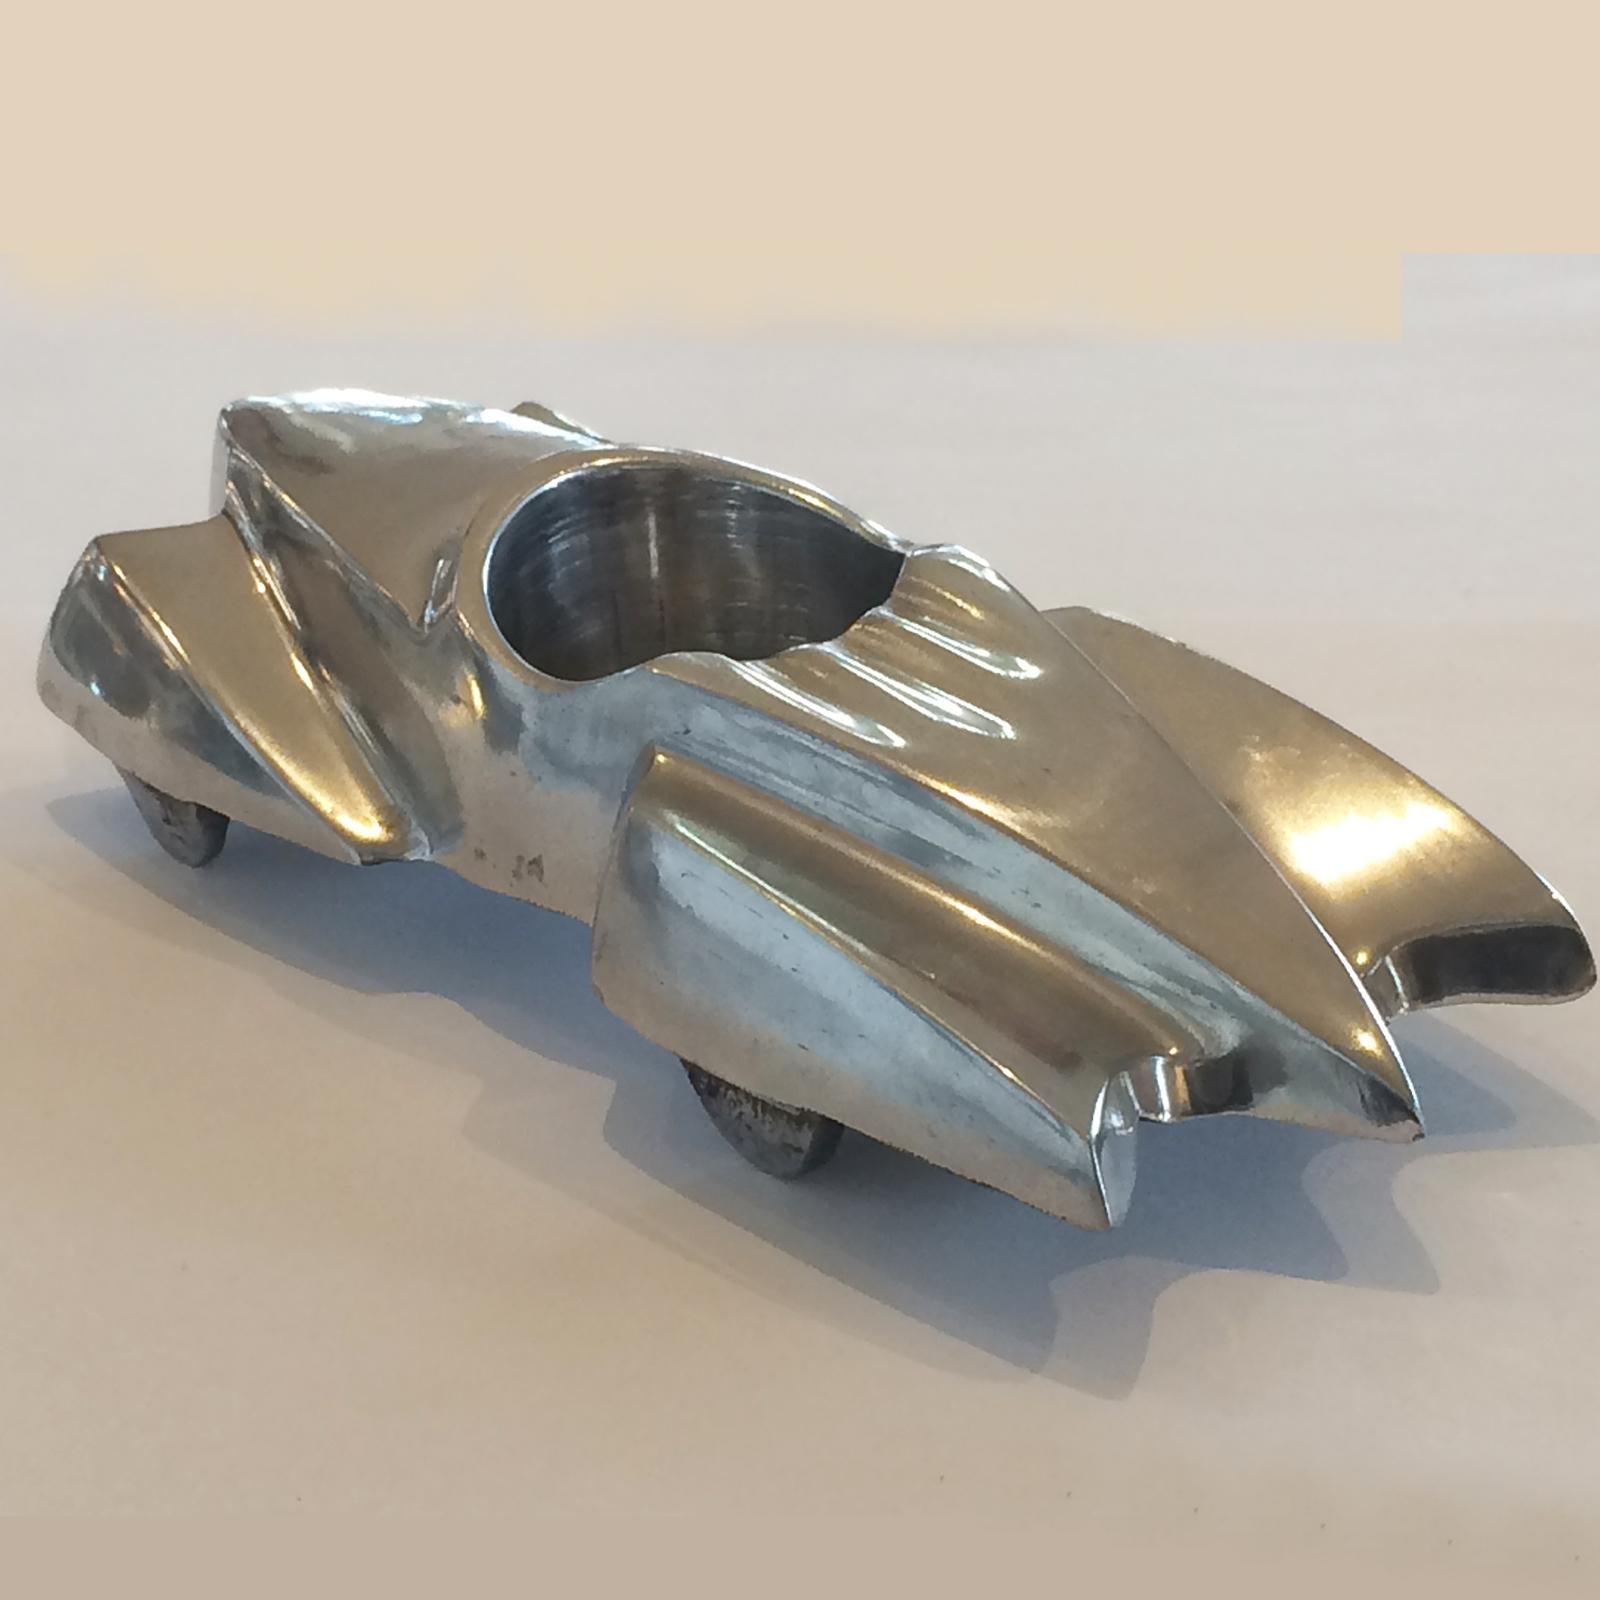 Art Deco polished aluminium car, pin, paperclip or ashtray. Fantastic streamlined shape, similar to the Cord Automobile of that time, U.S.A. All in excellent condition with no damage, no repairs or loses. Dimensions are approx.: 21cm long x 8cm wide